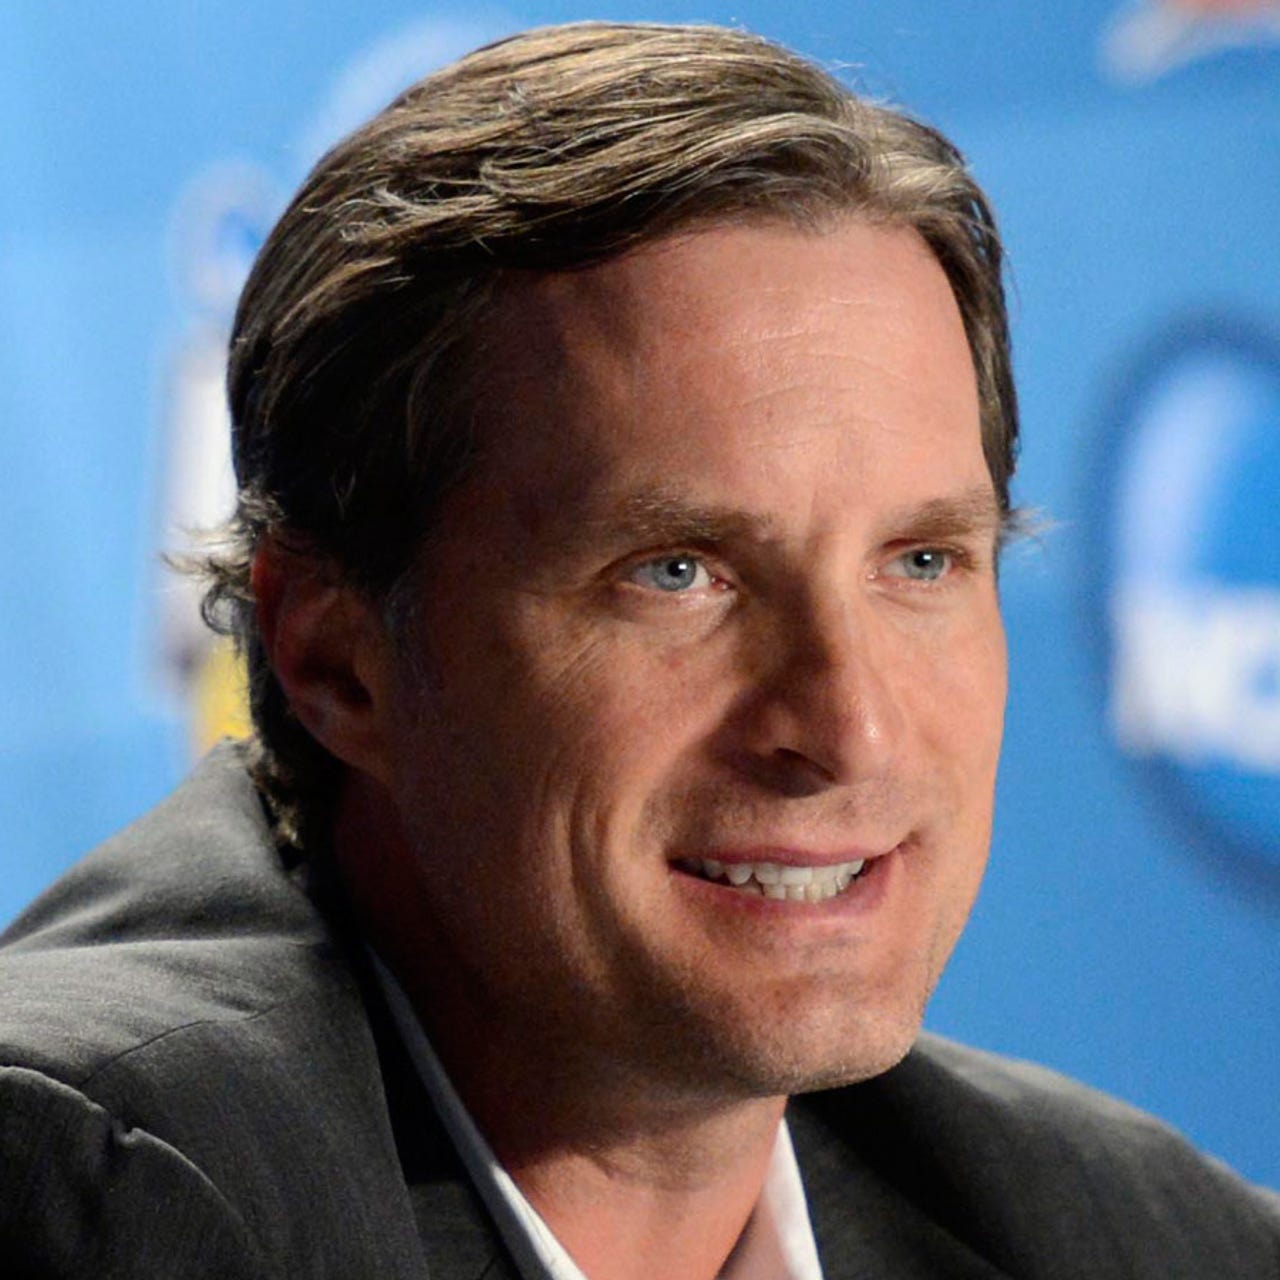 Rob Lowe: People hate Christian Laettner because he's a 'massively